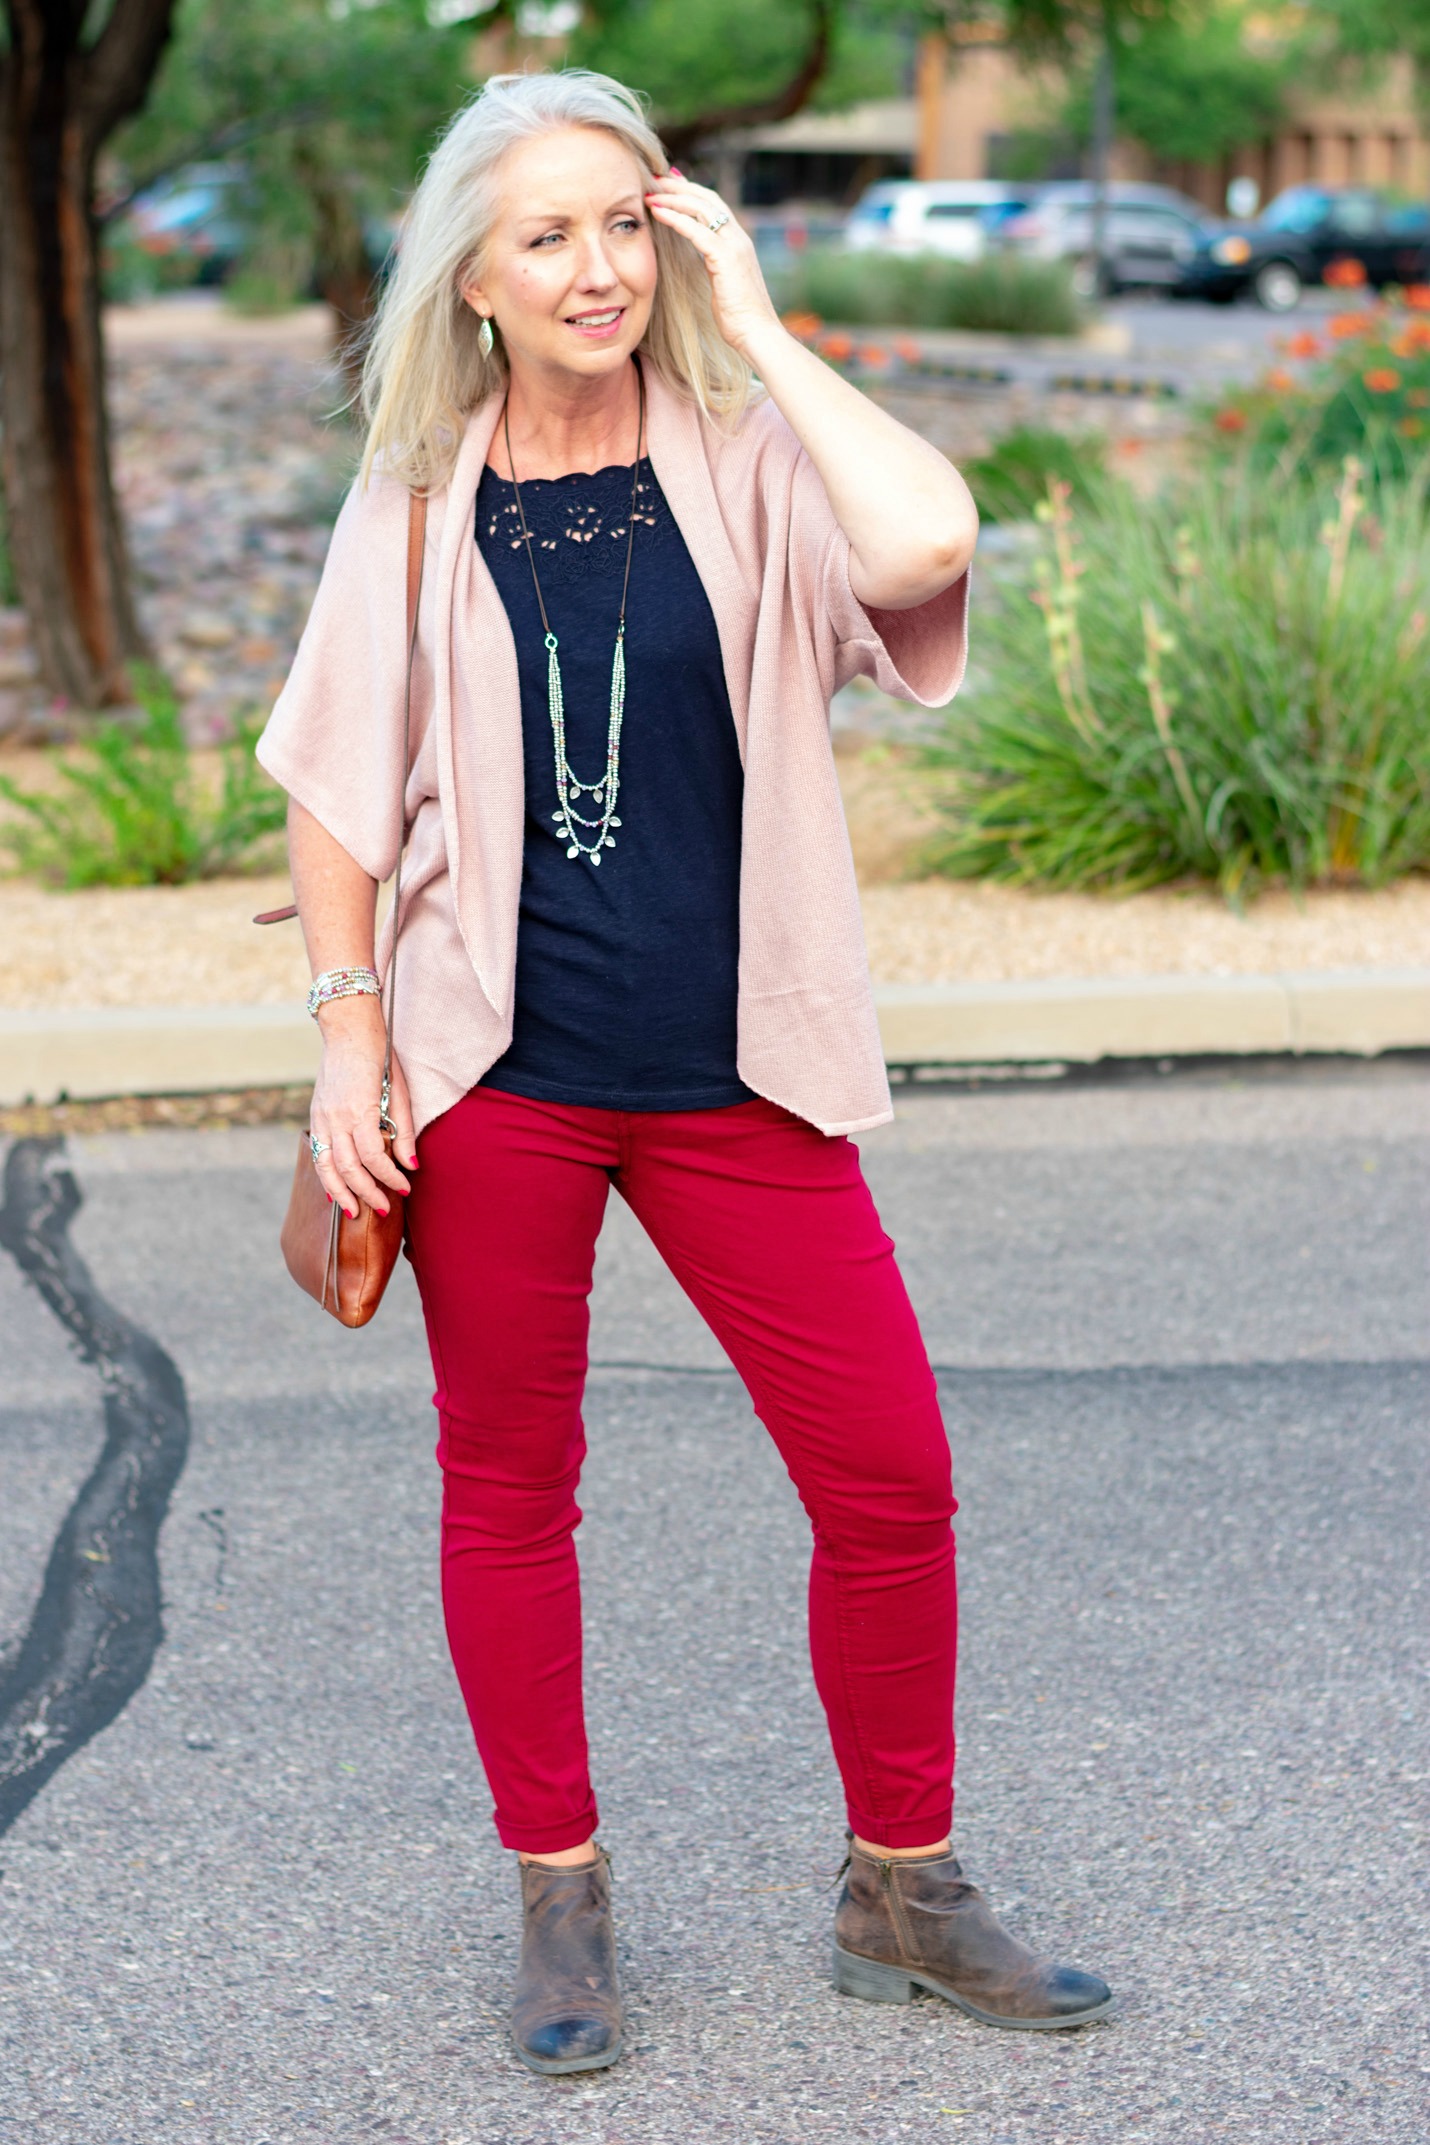 Dolman Sleeve Cardigan with Colored Jeans